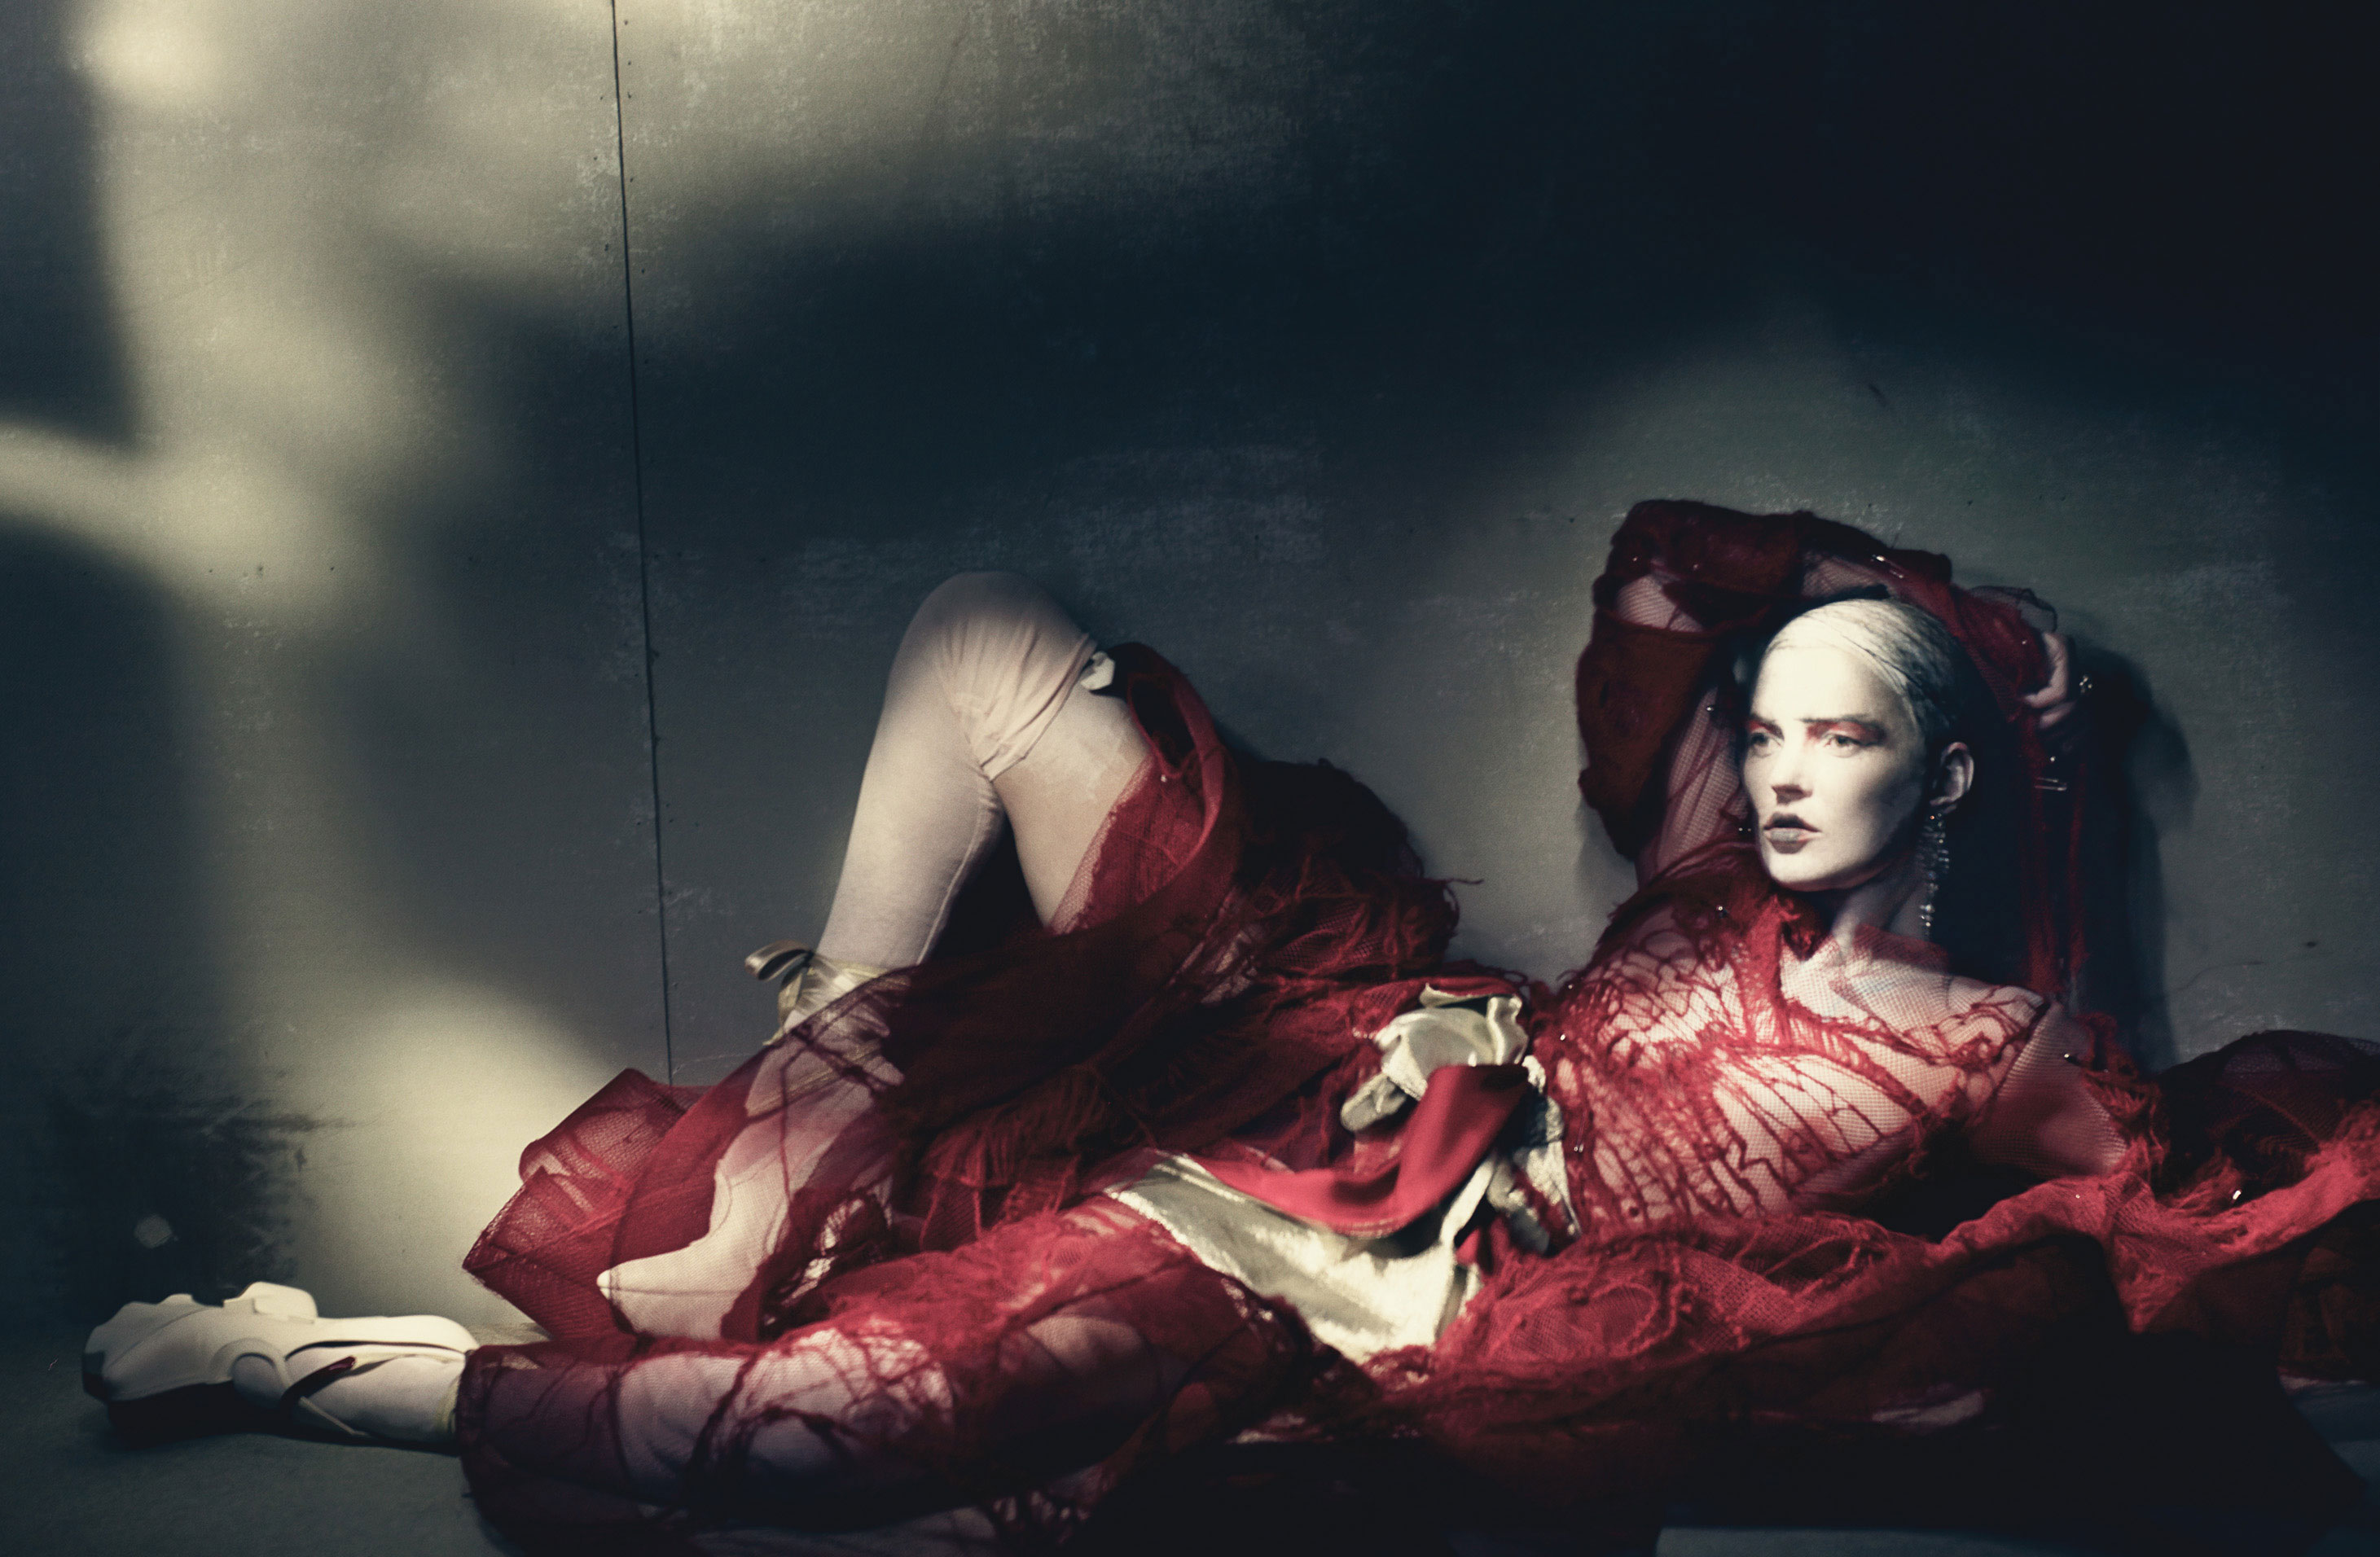 kate-moss-by-paolo-roversi-for-w-magazine-april-2015-2